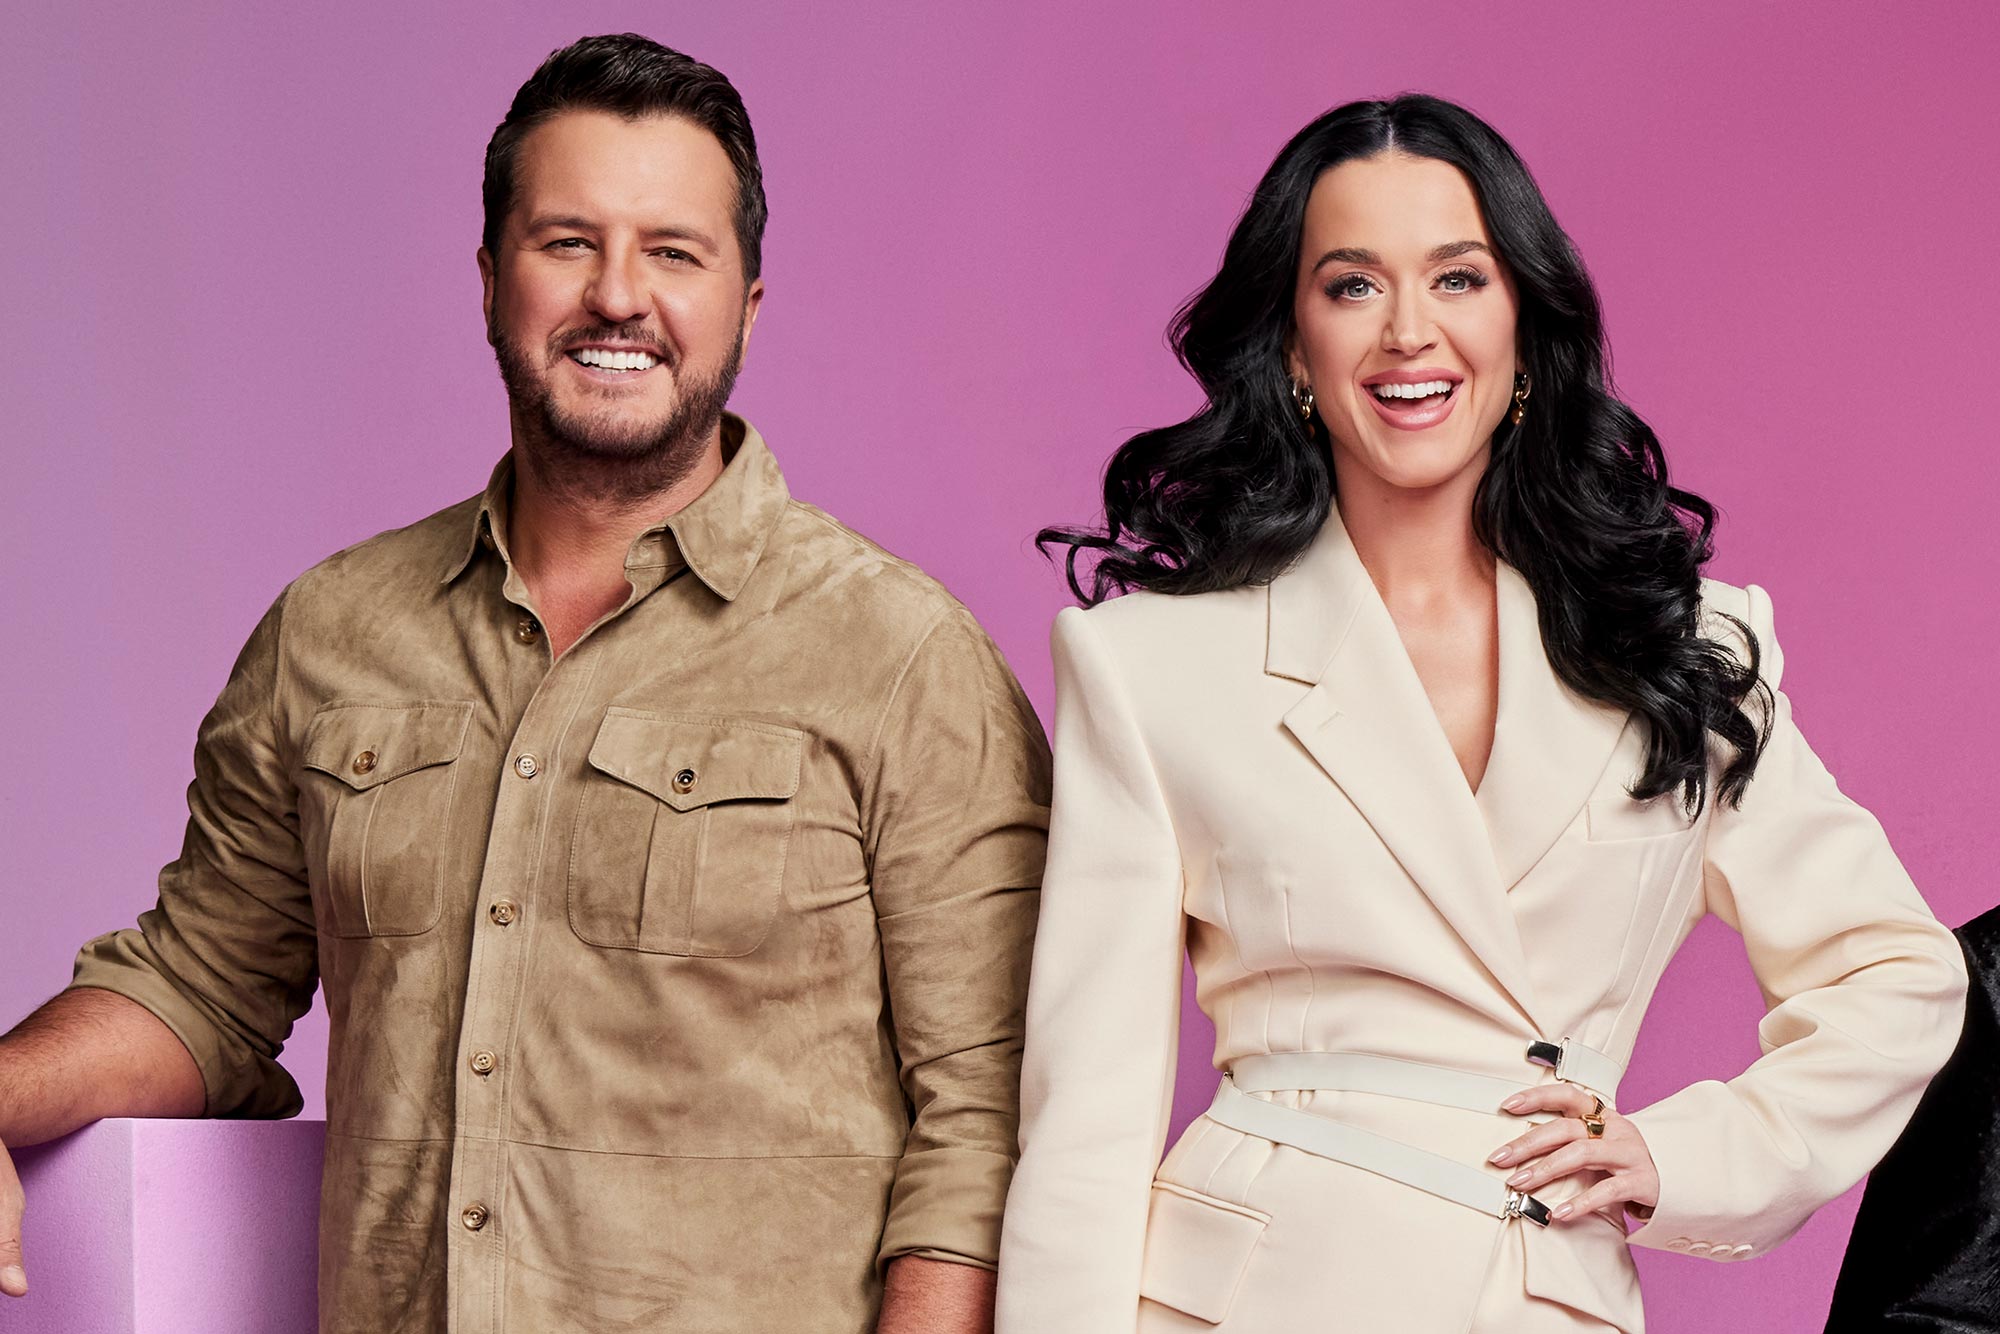 Luke Bryan on Possible Katy Perry American Idol Replacements